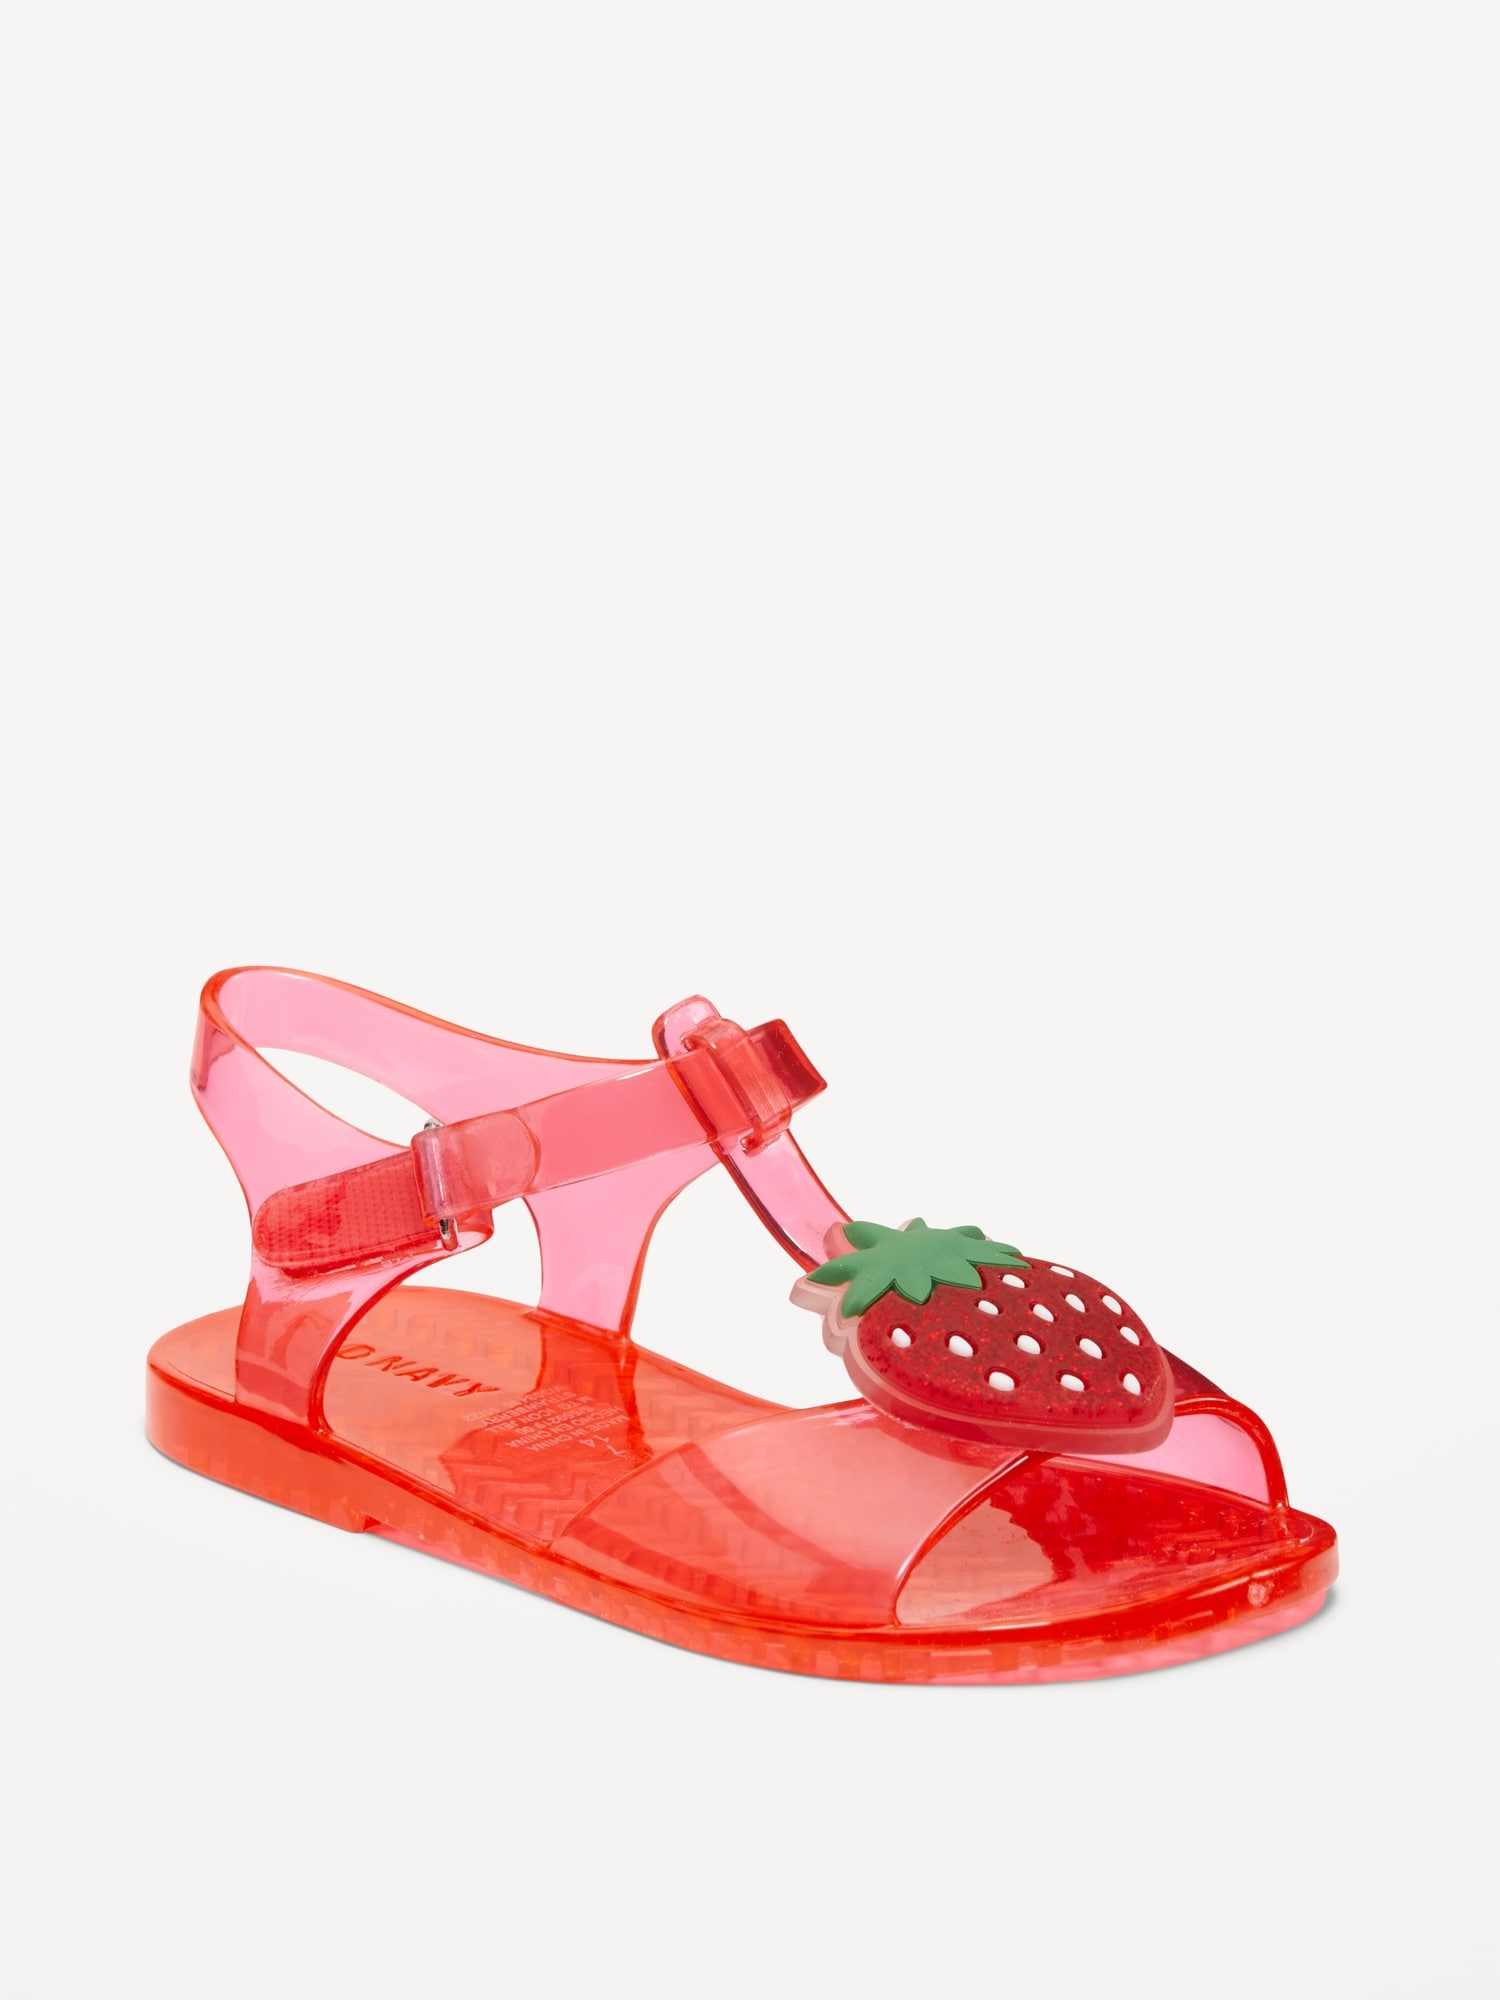 vintage jelly shoes products for sale